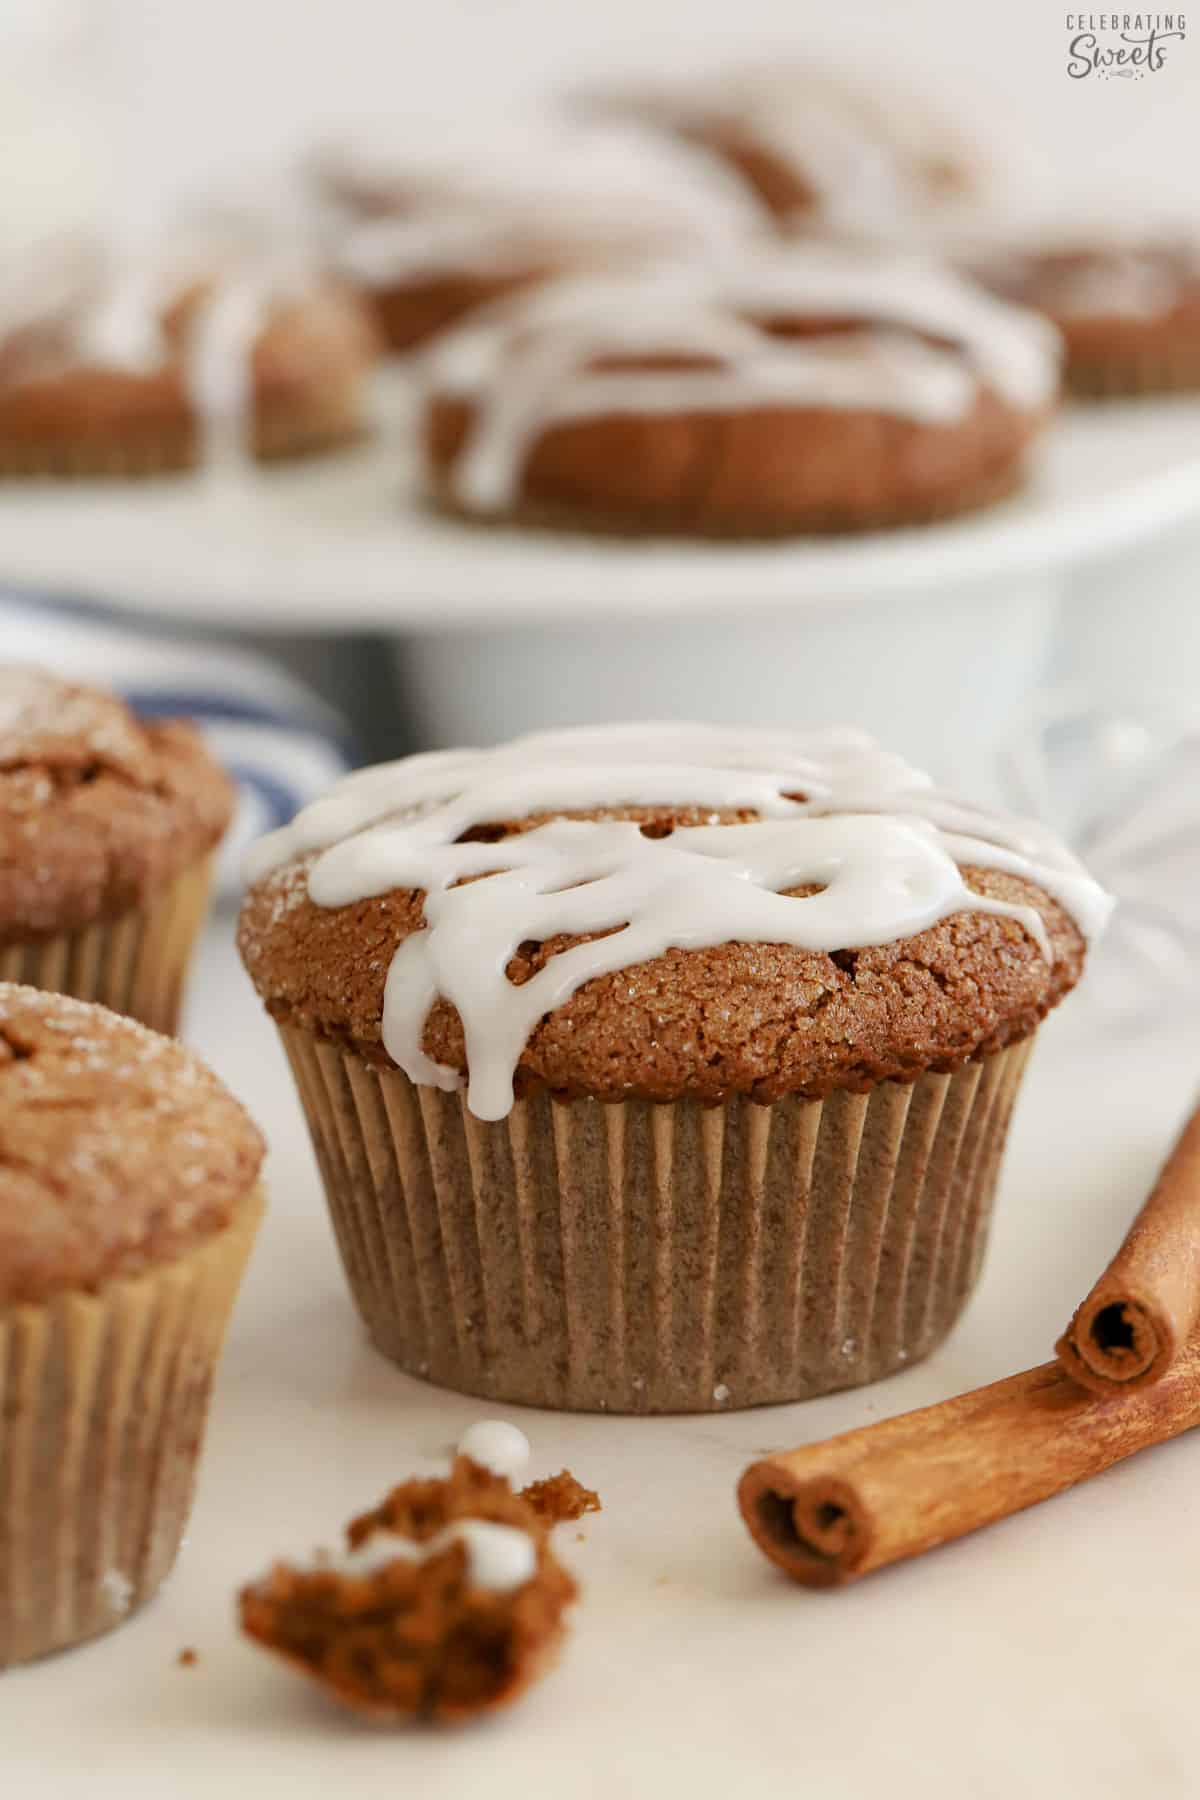 Gingerbread muffins topped with white icing next to two cinnamon sticks.